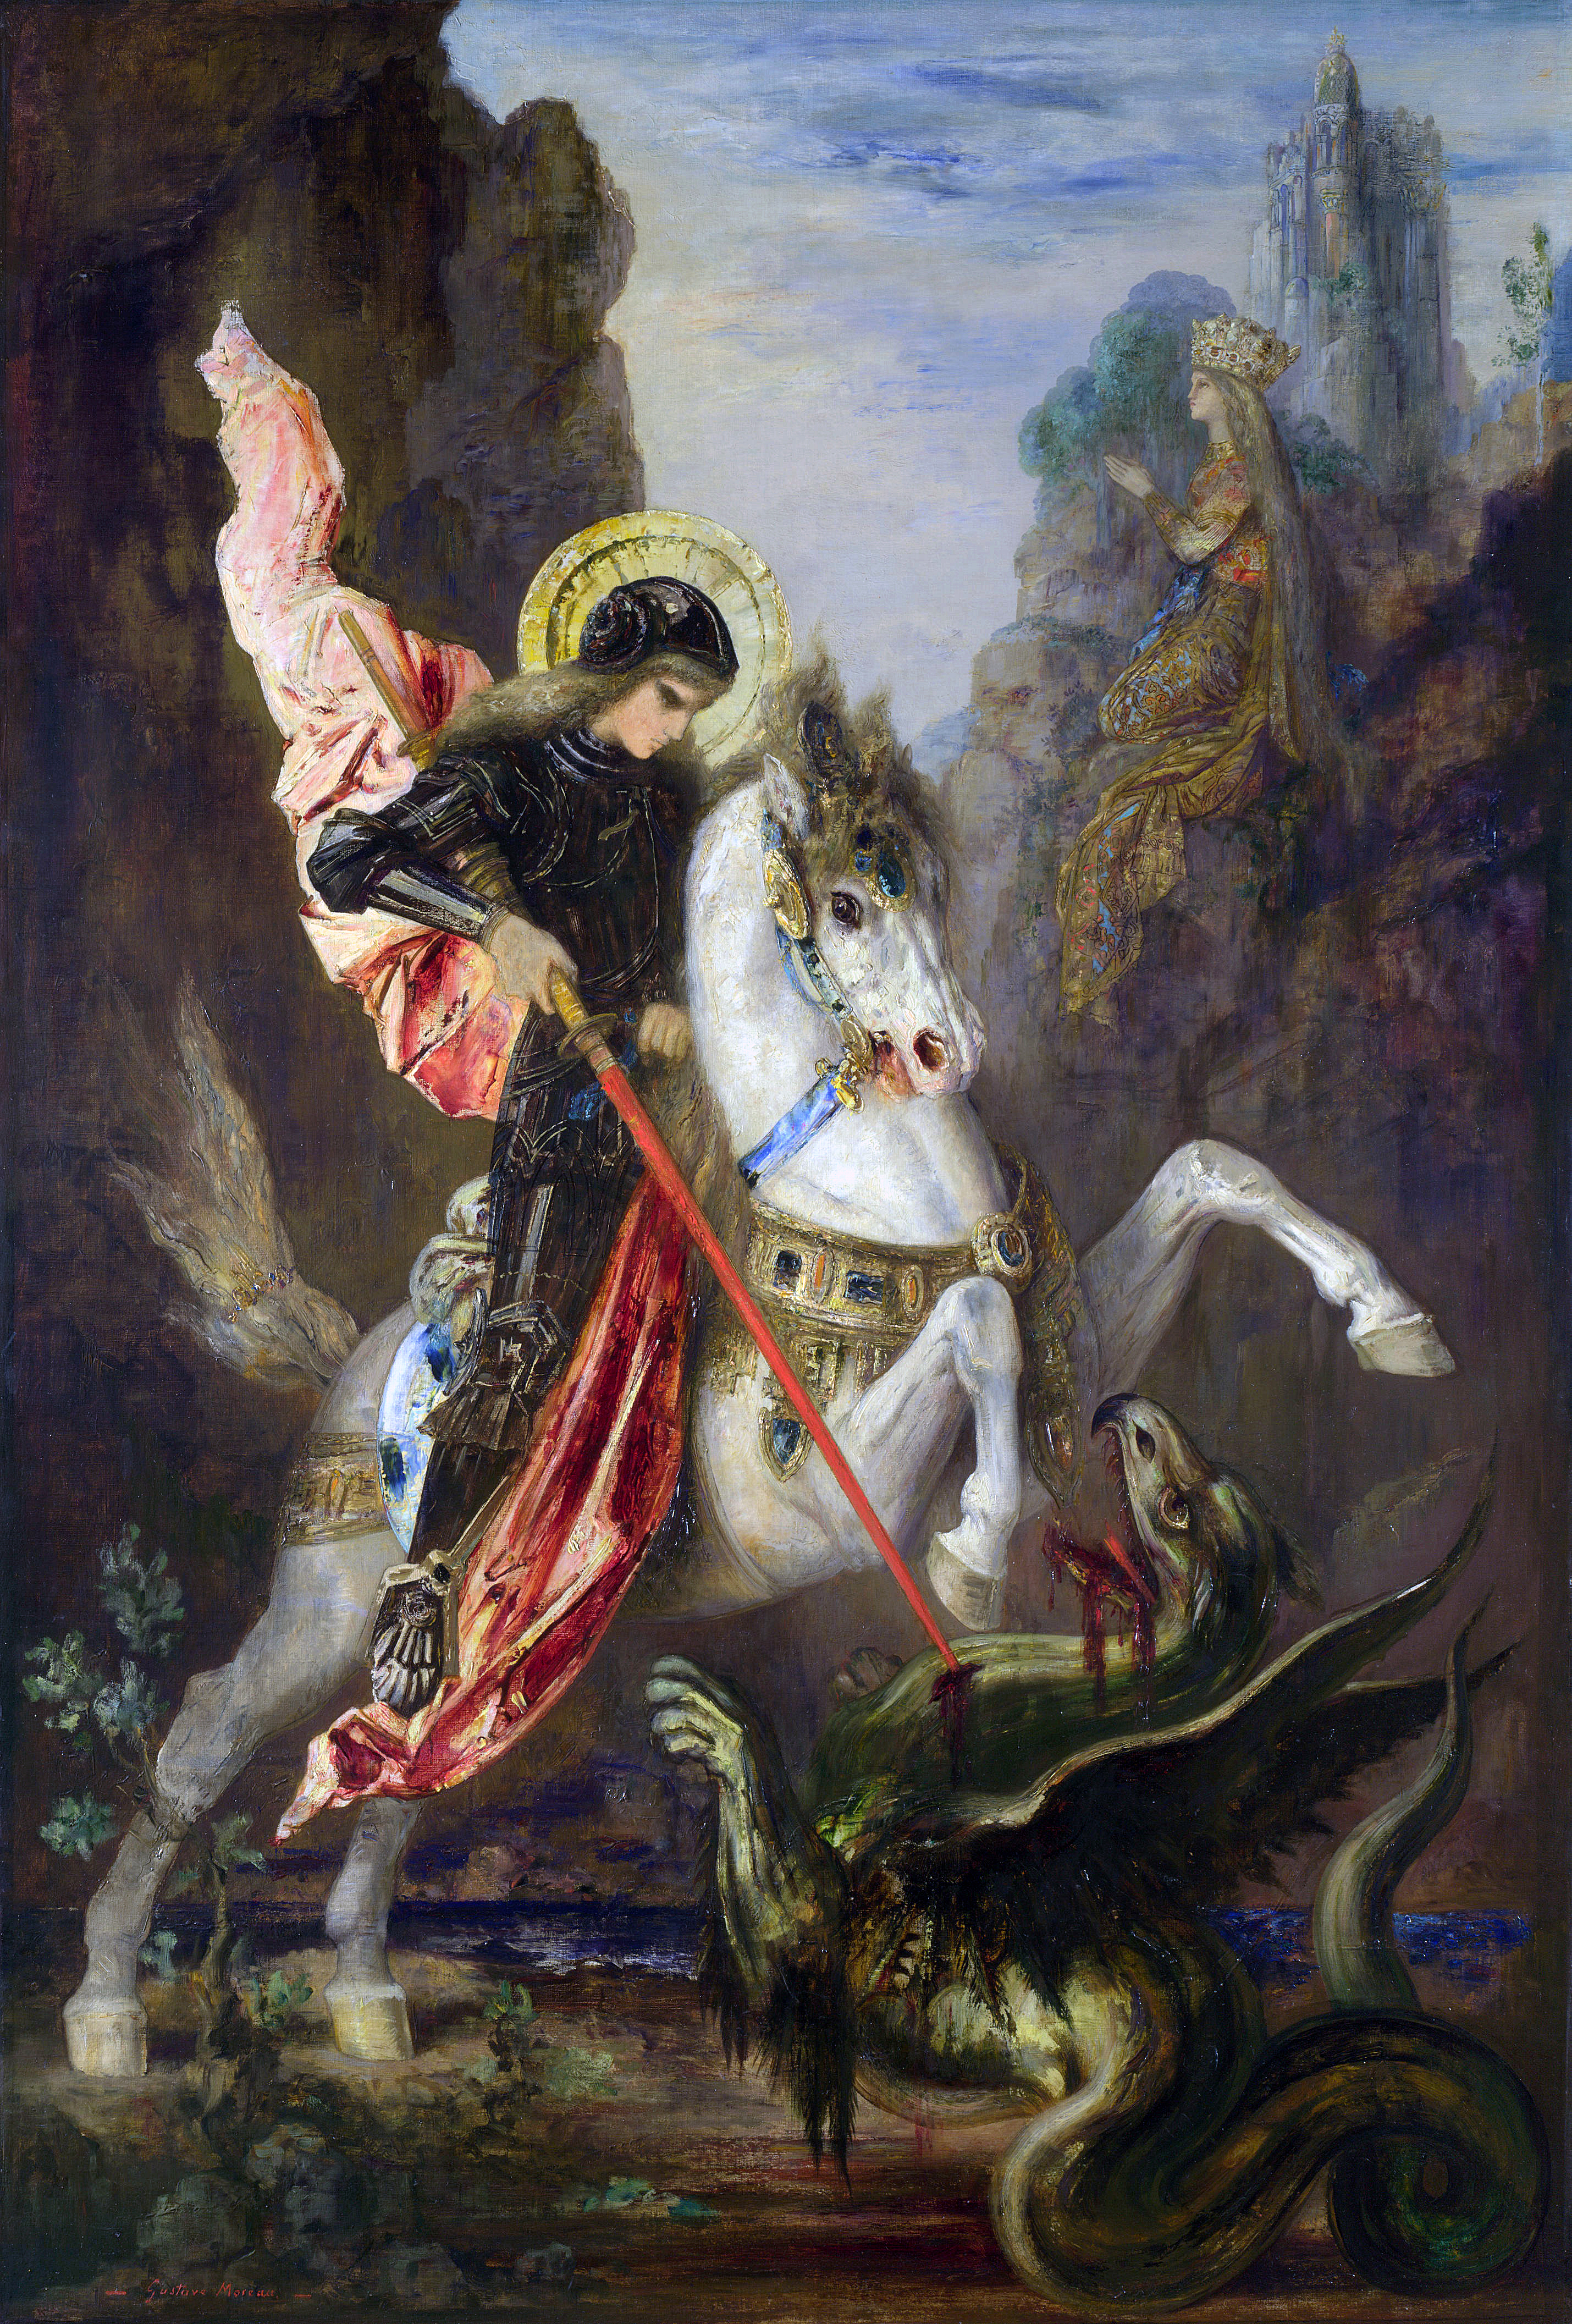 St George slaying the dragon, by Gustave Moreau